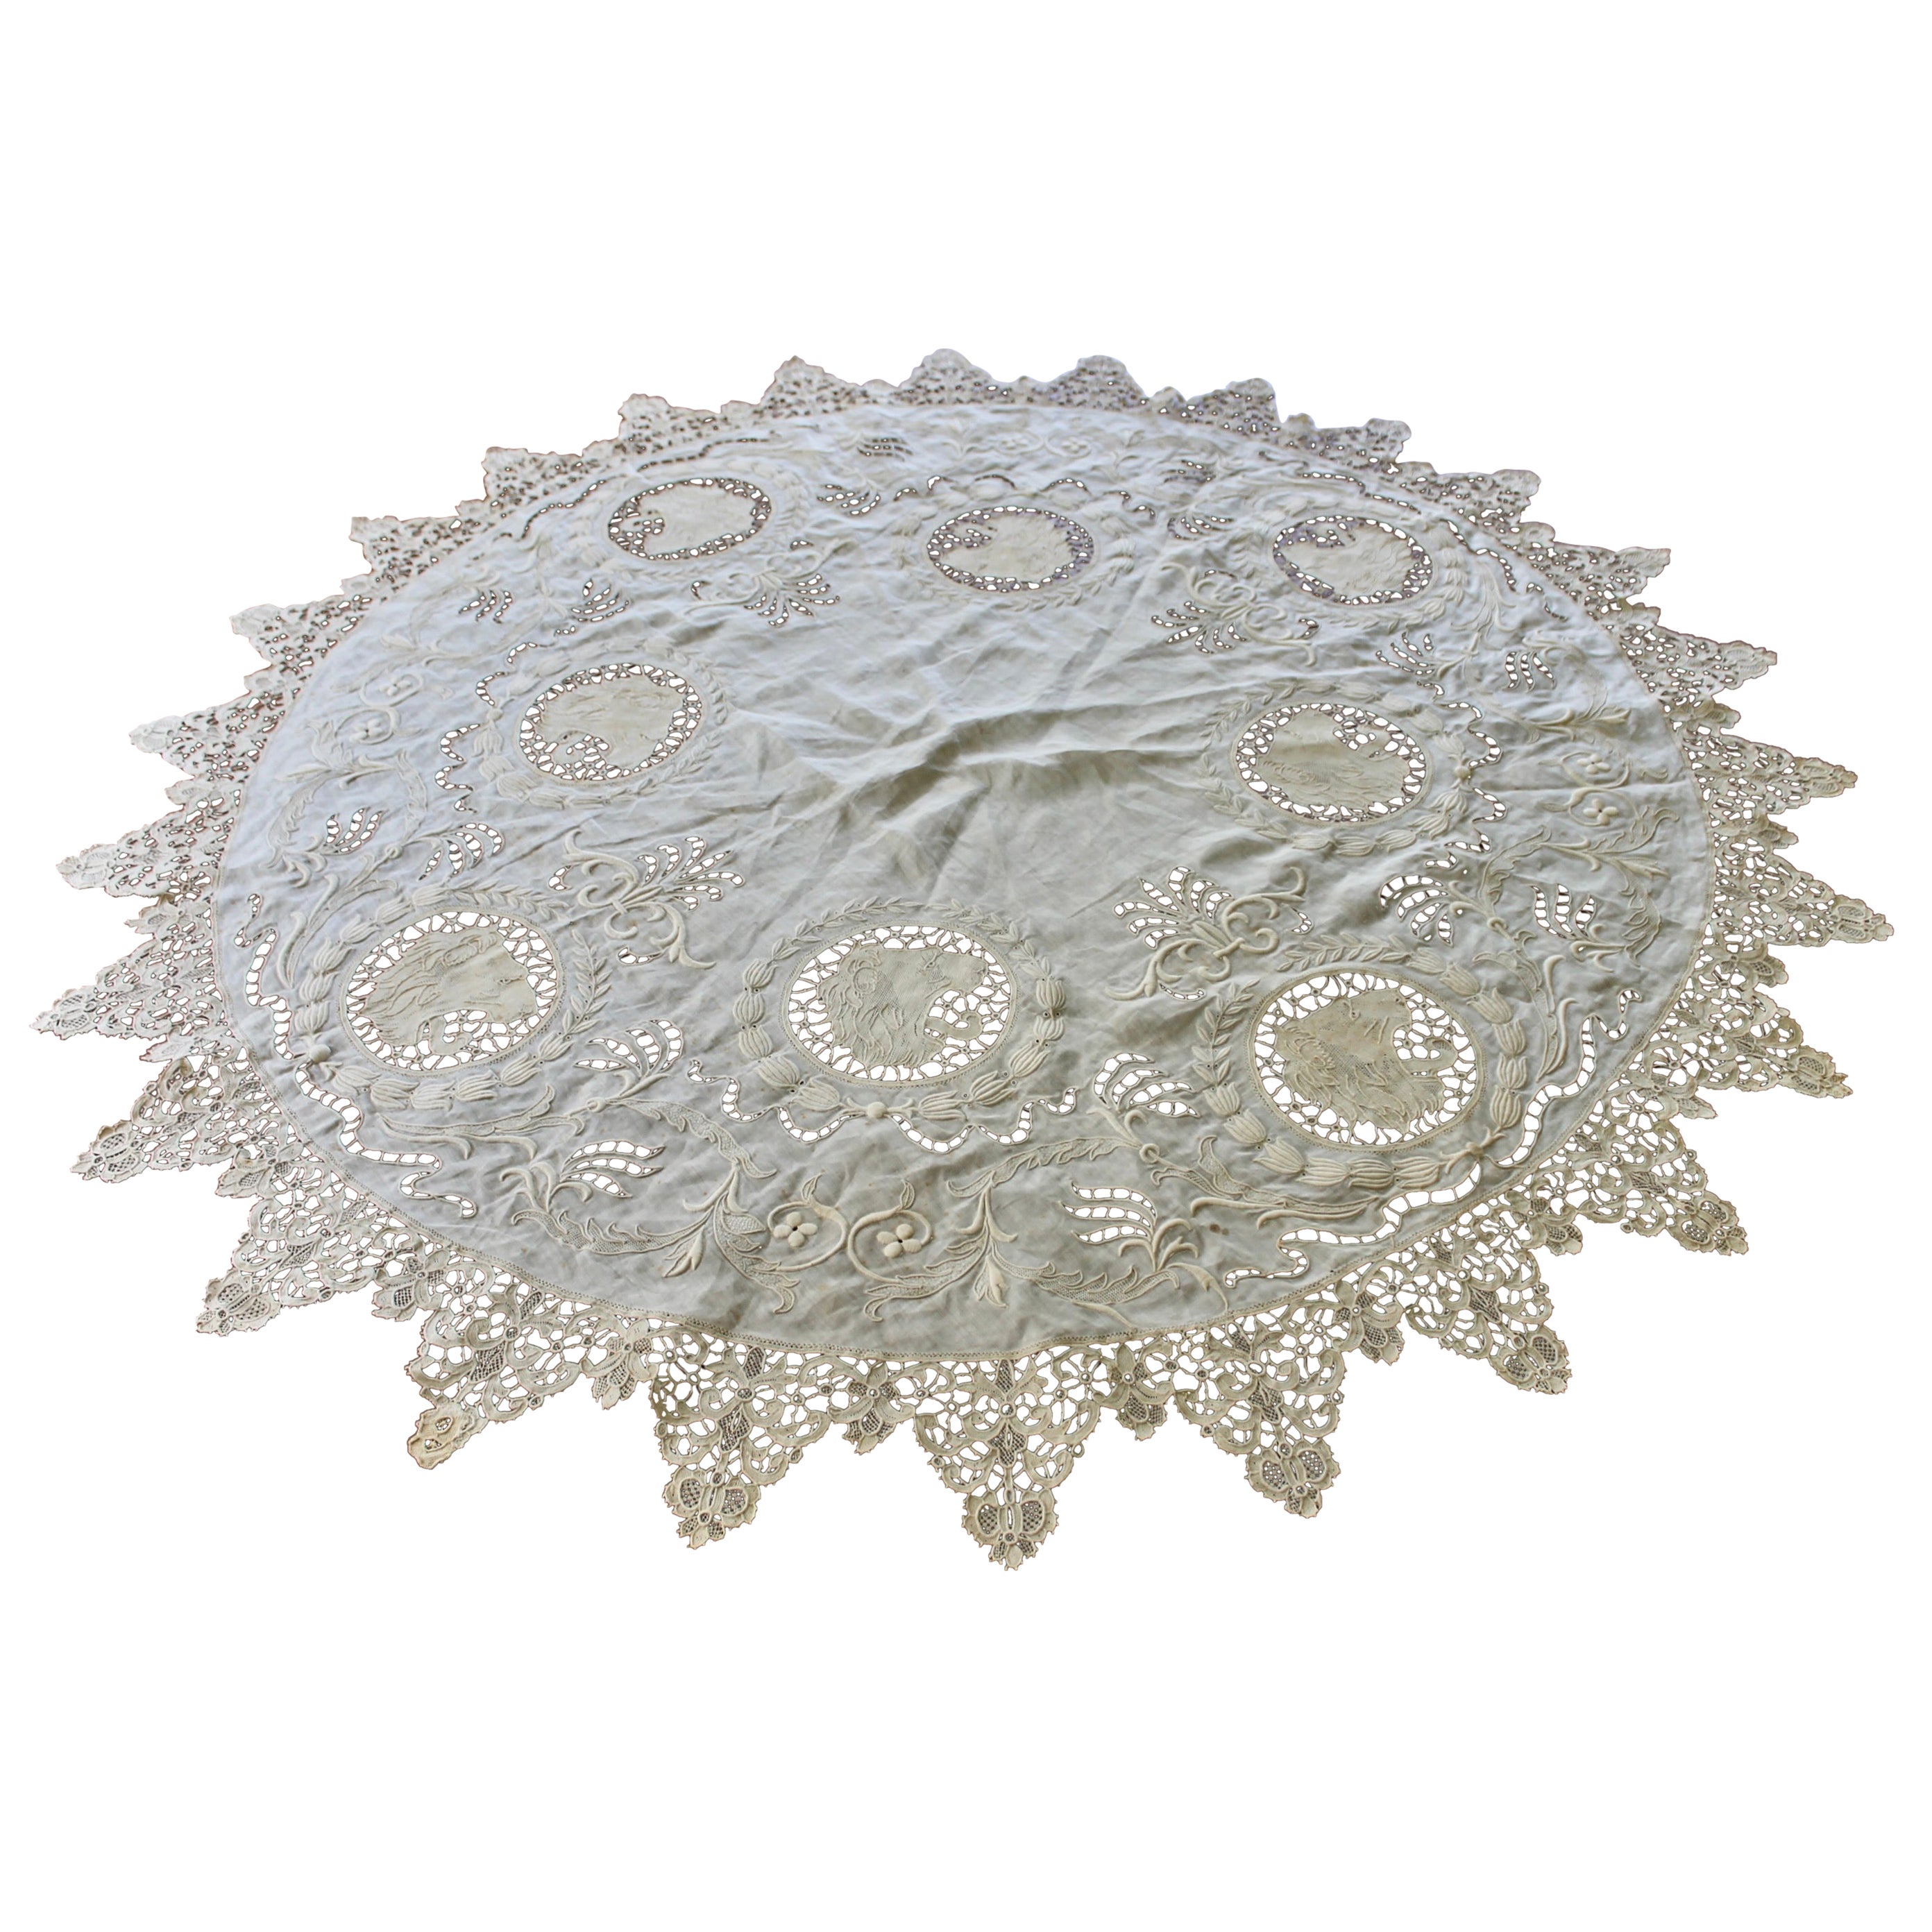 Antique Italian Lace Tablecloth, late 19th c. For Sale